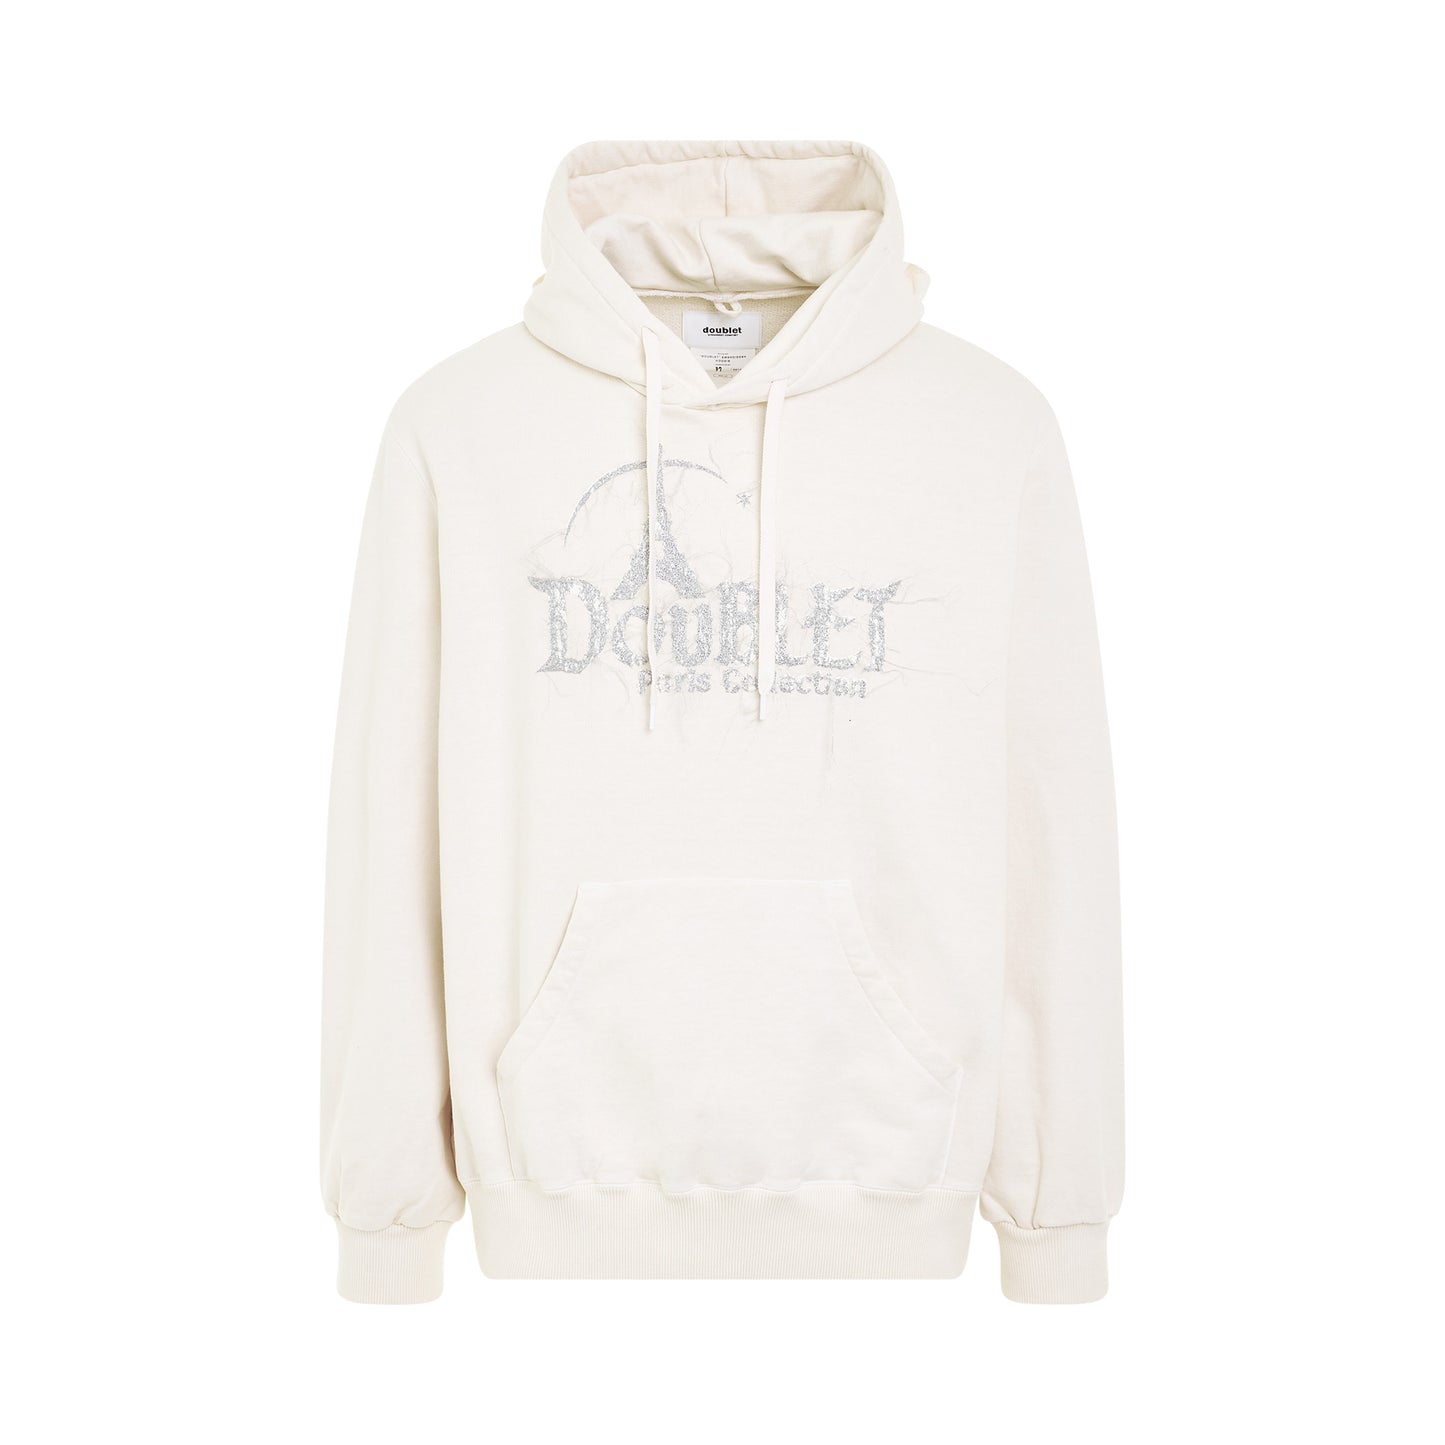 "DOUBLAND" Embroidery Hoodie in White